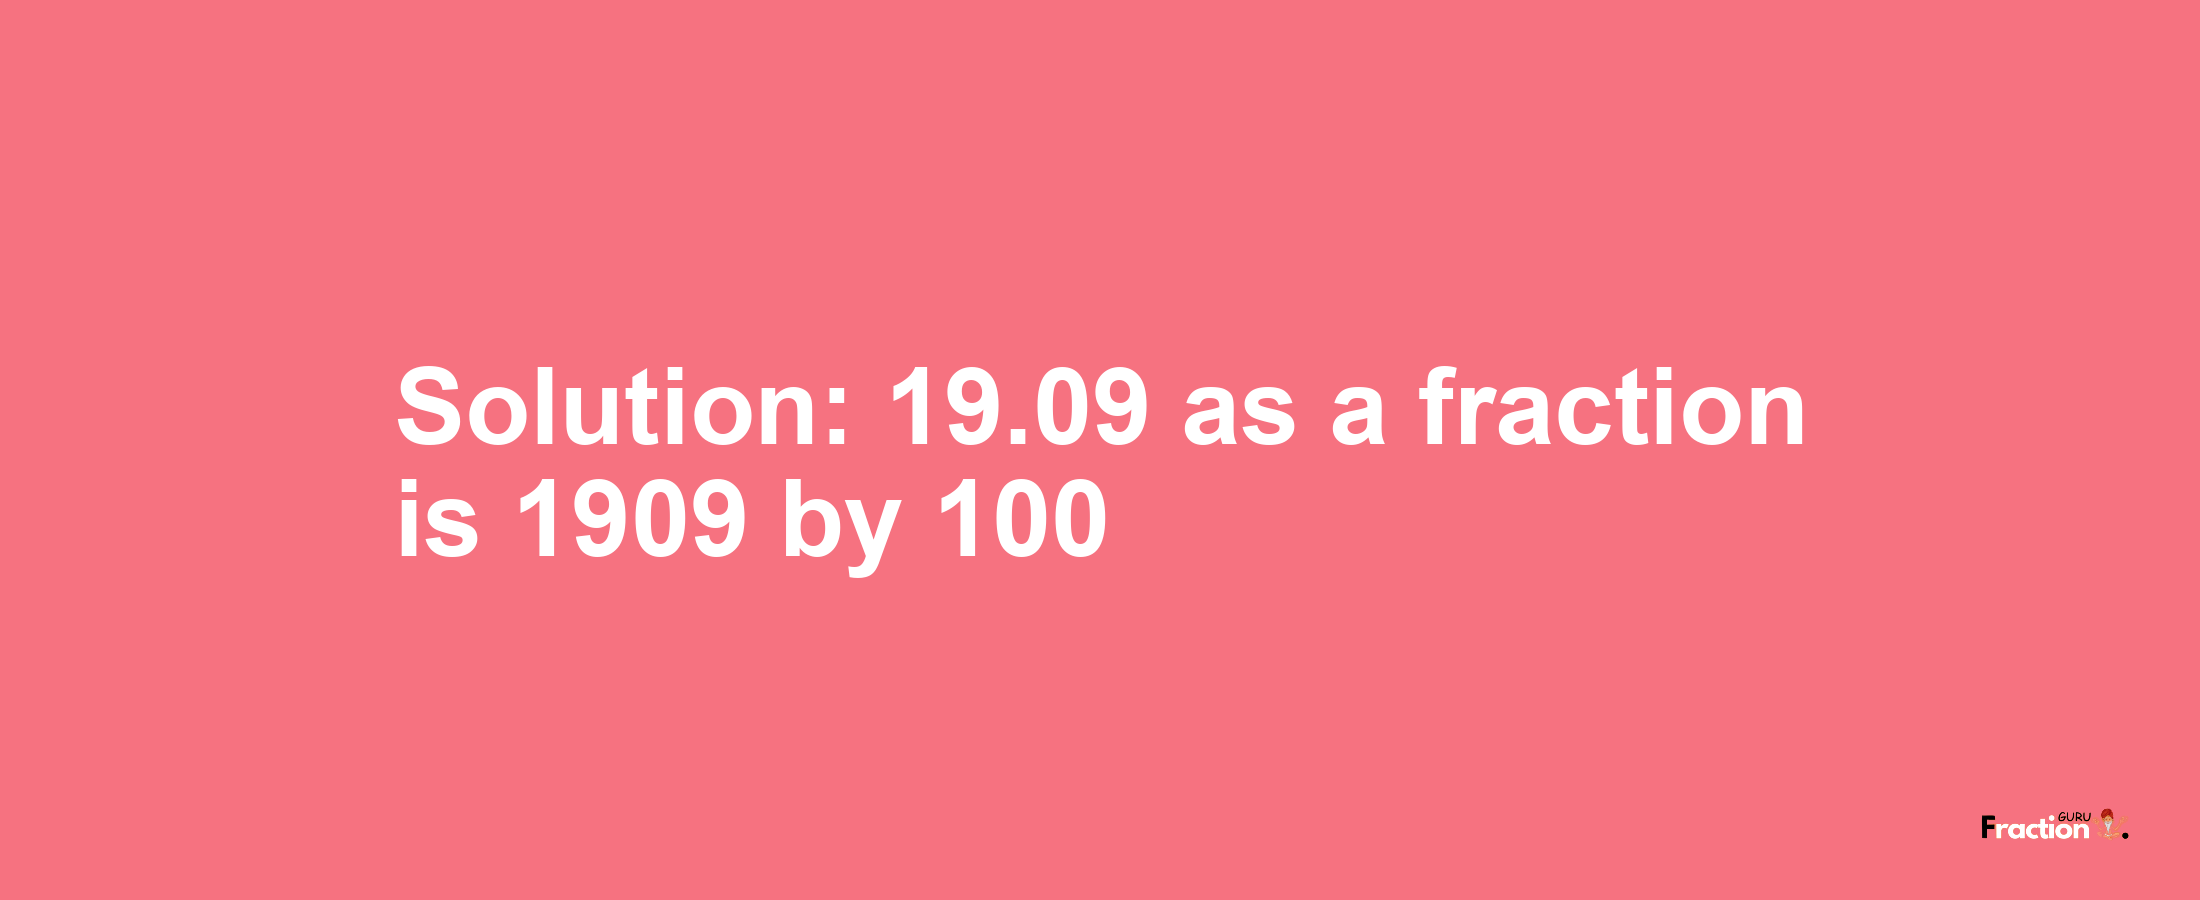 Solution:19.09 as a fraction is 1909/100